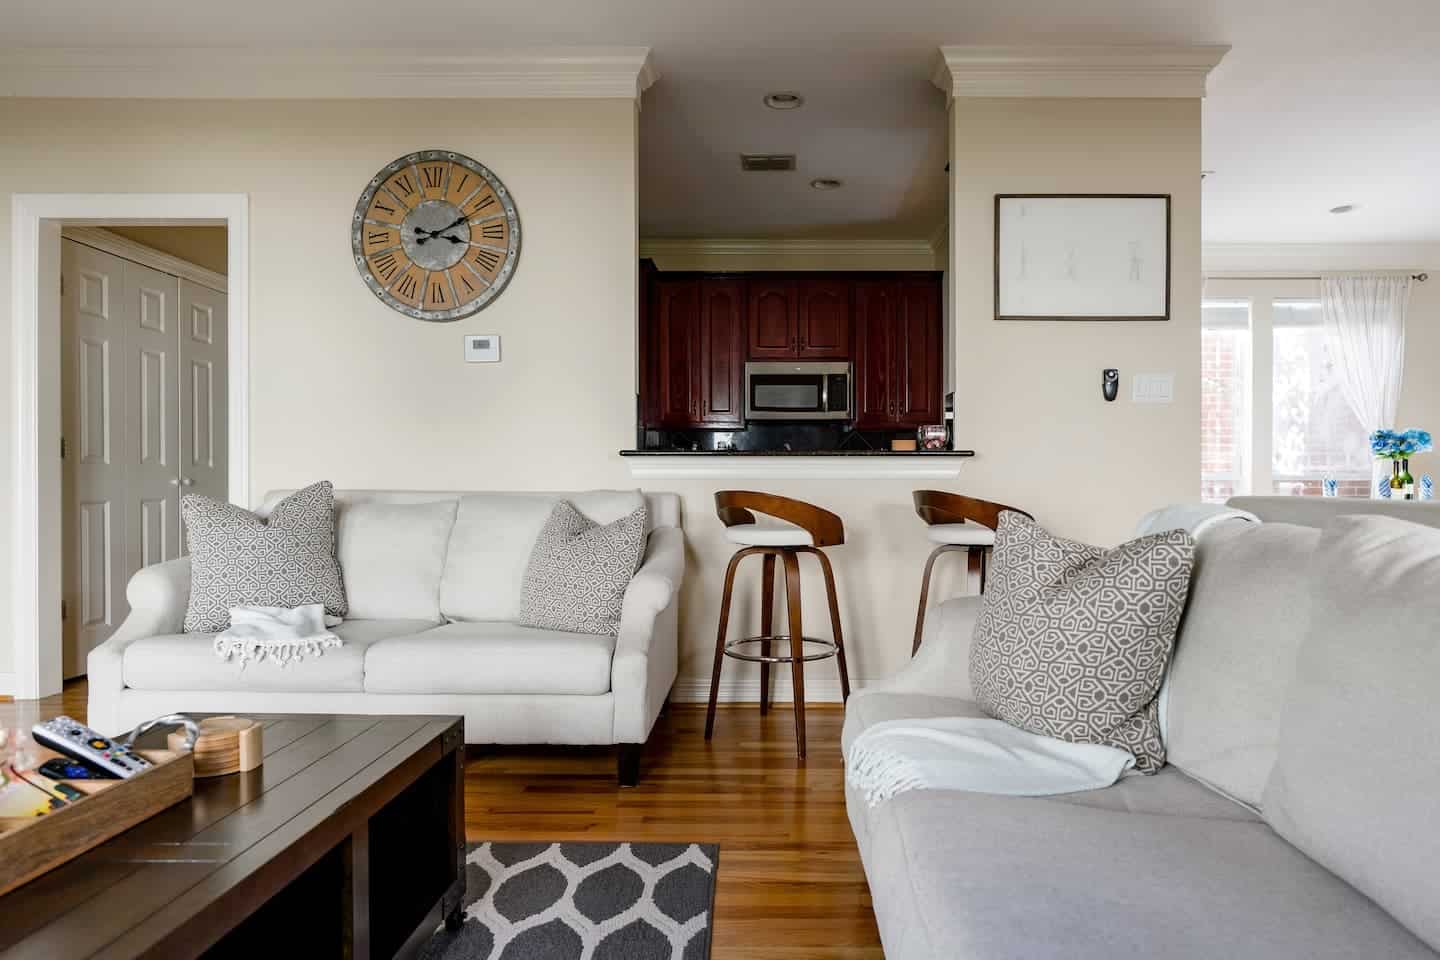 Image of Airbnb rental in Dallas